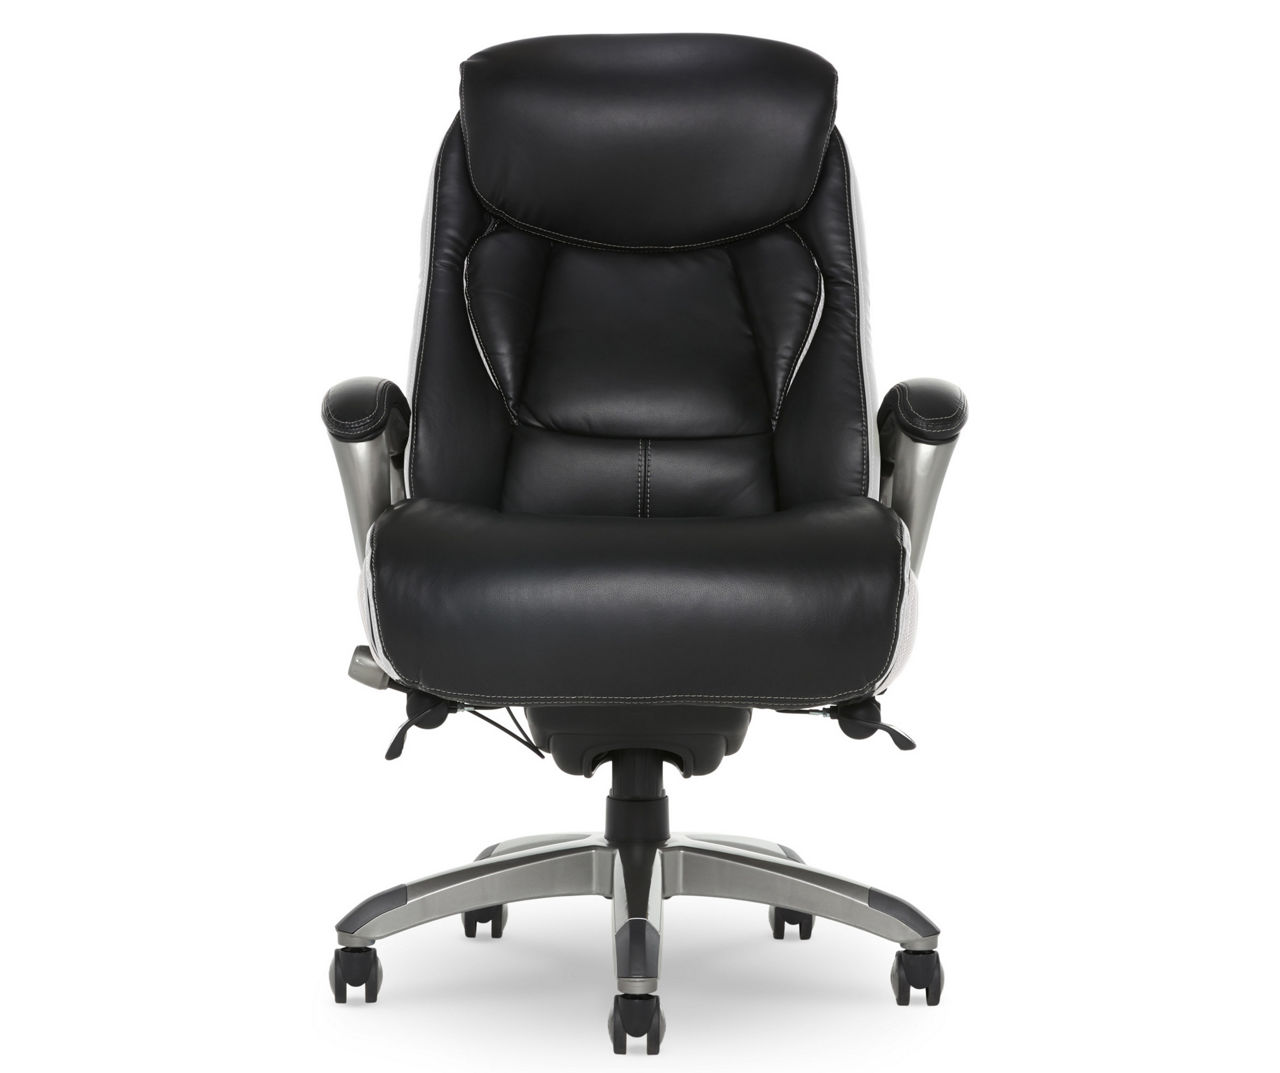 Lautner Black Executive Bonded Leather Office Chair